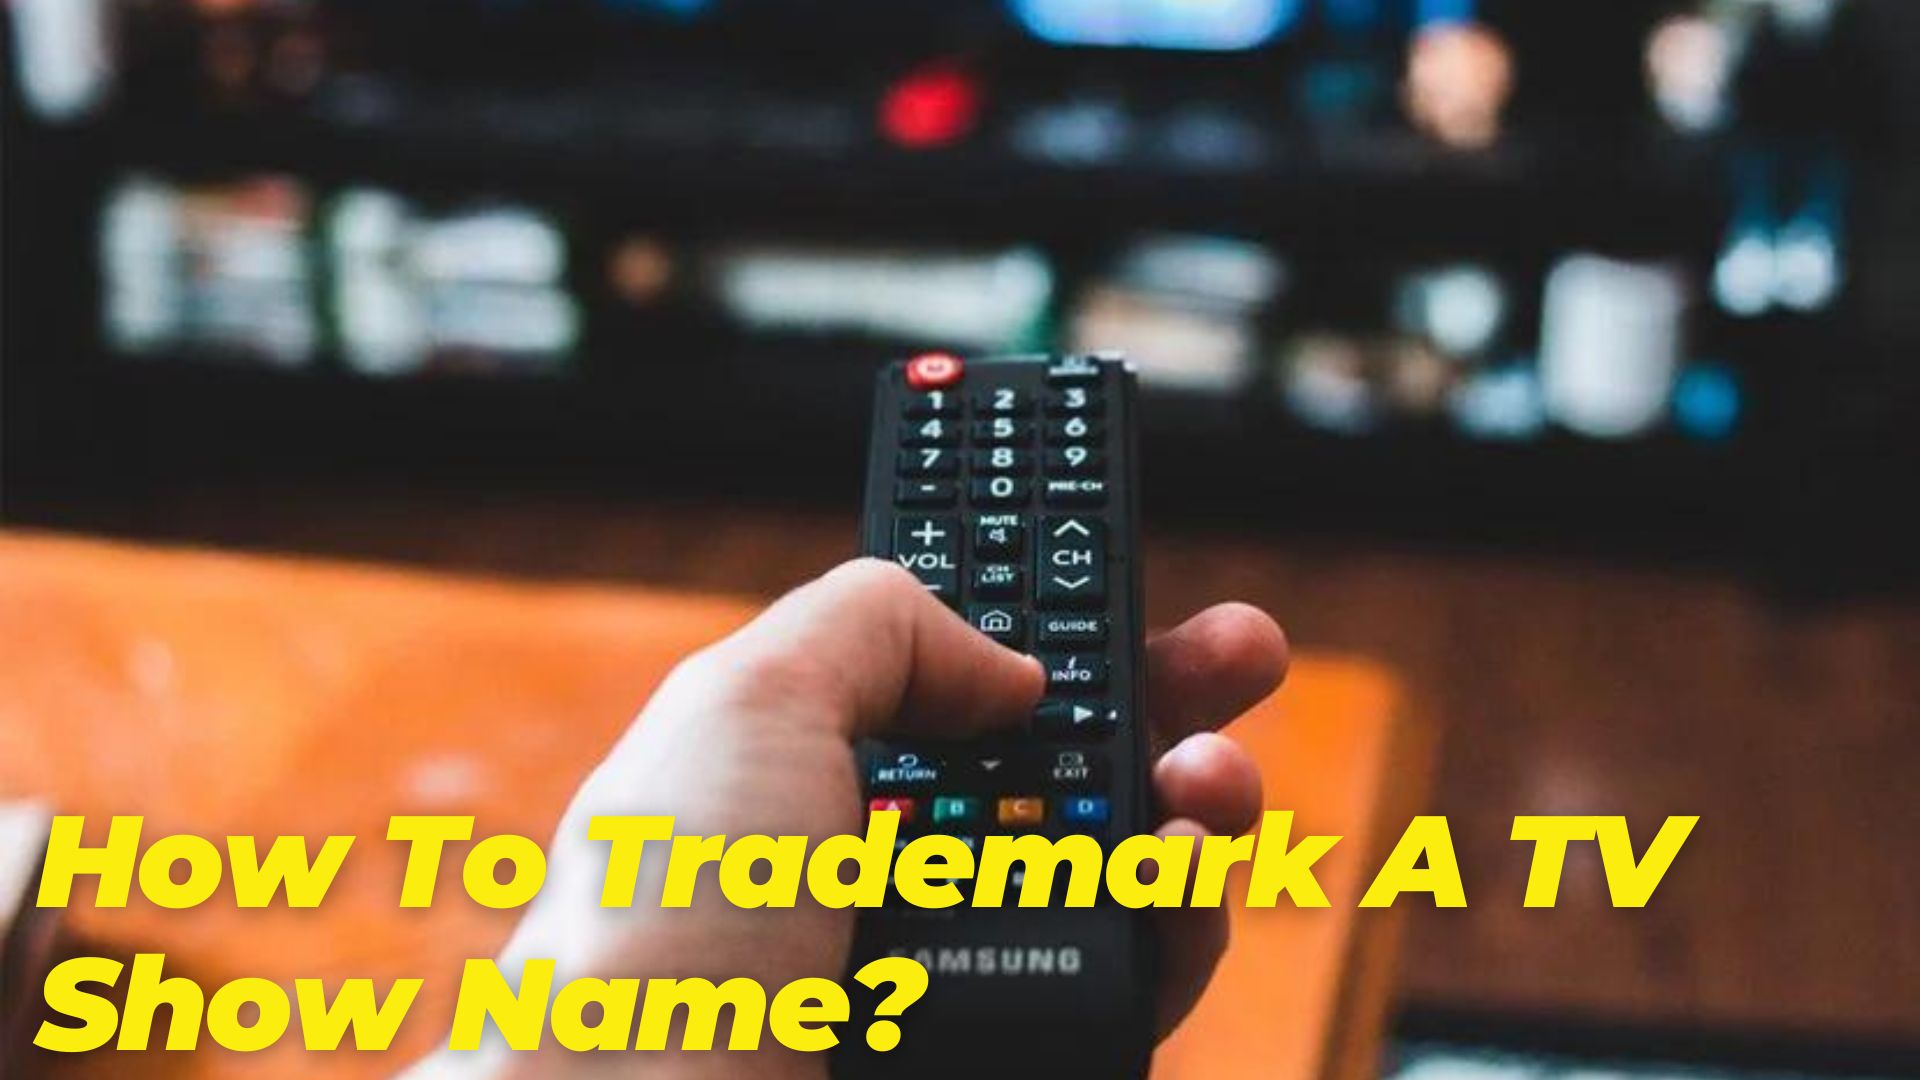 How To Trademark A TV Show Name?